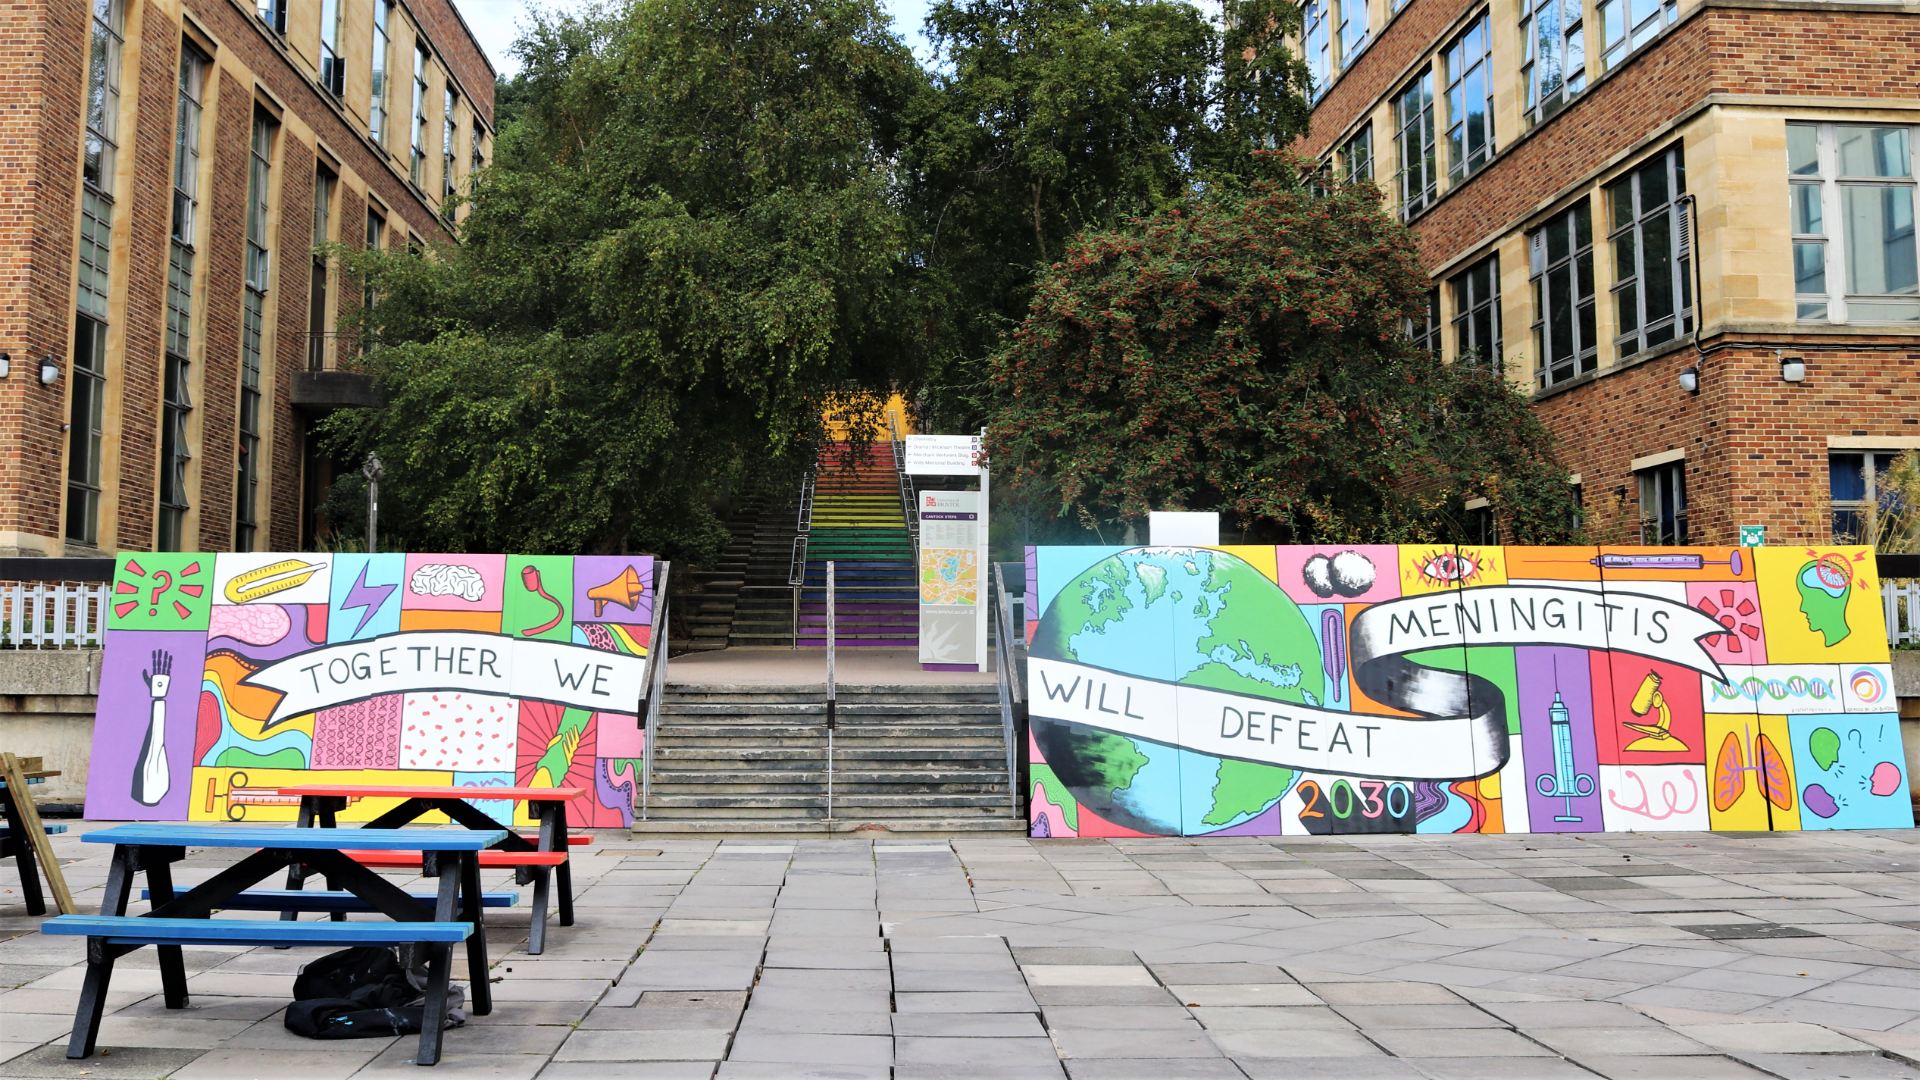 Temporary mural on boards situated at bottom of steps saying Together we will defeat meningitis